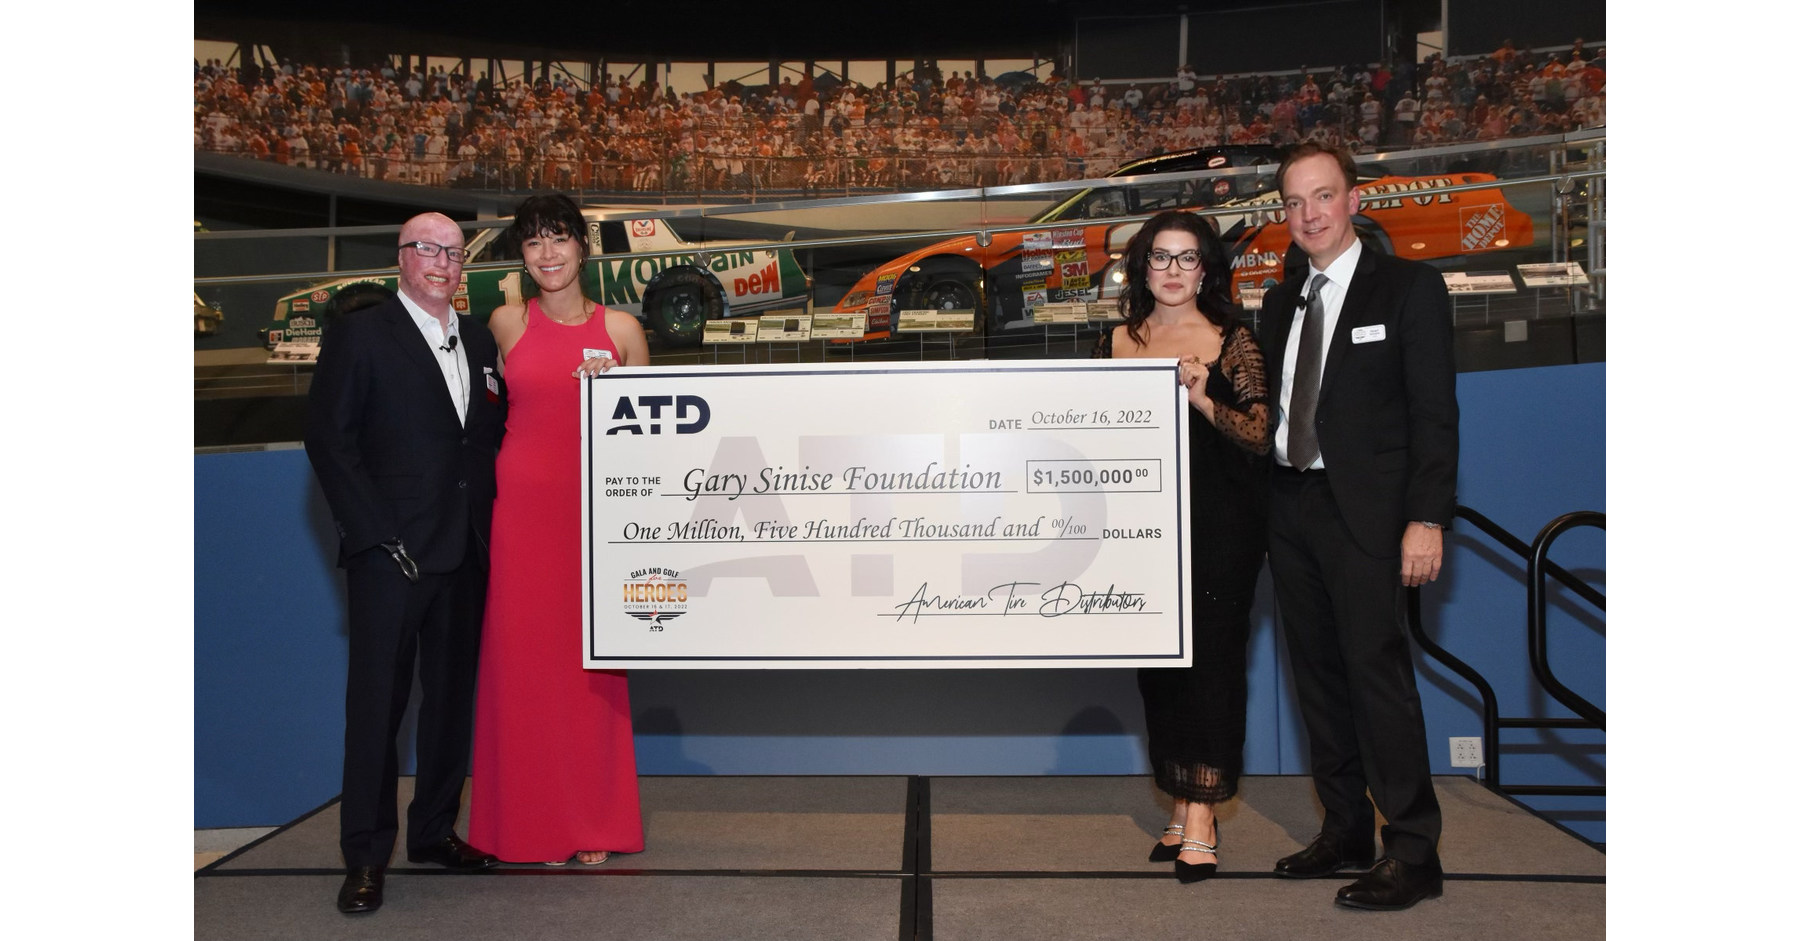 American Tire Distributors Continues Philanthropic Commitment, Donating $1.5M to the Gary Sinise Foundation